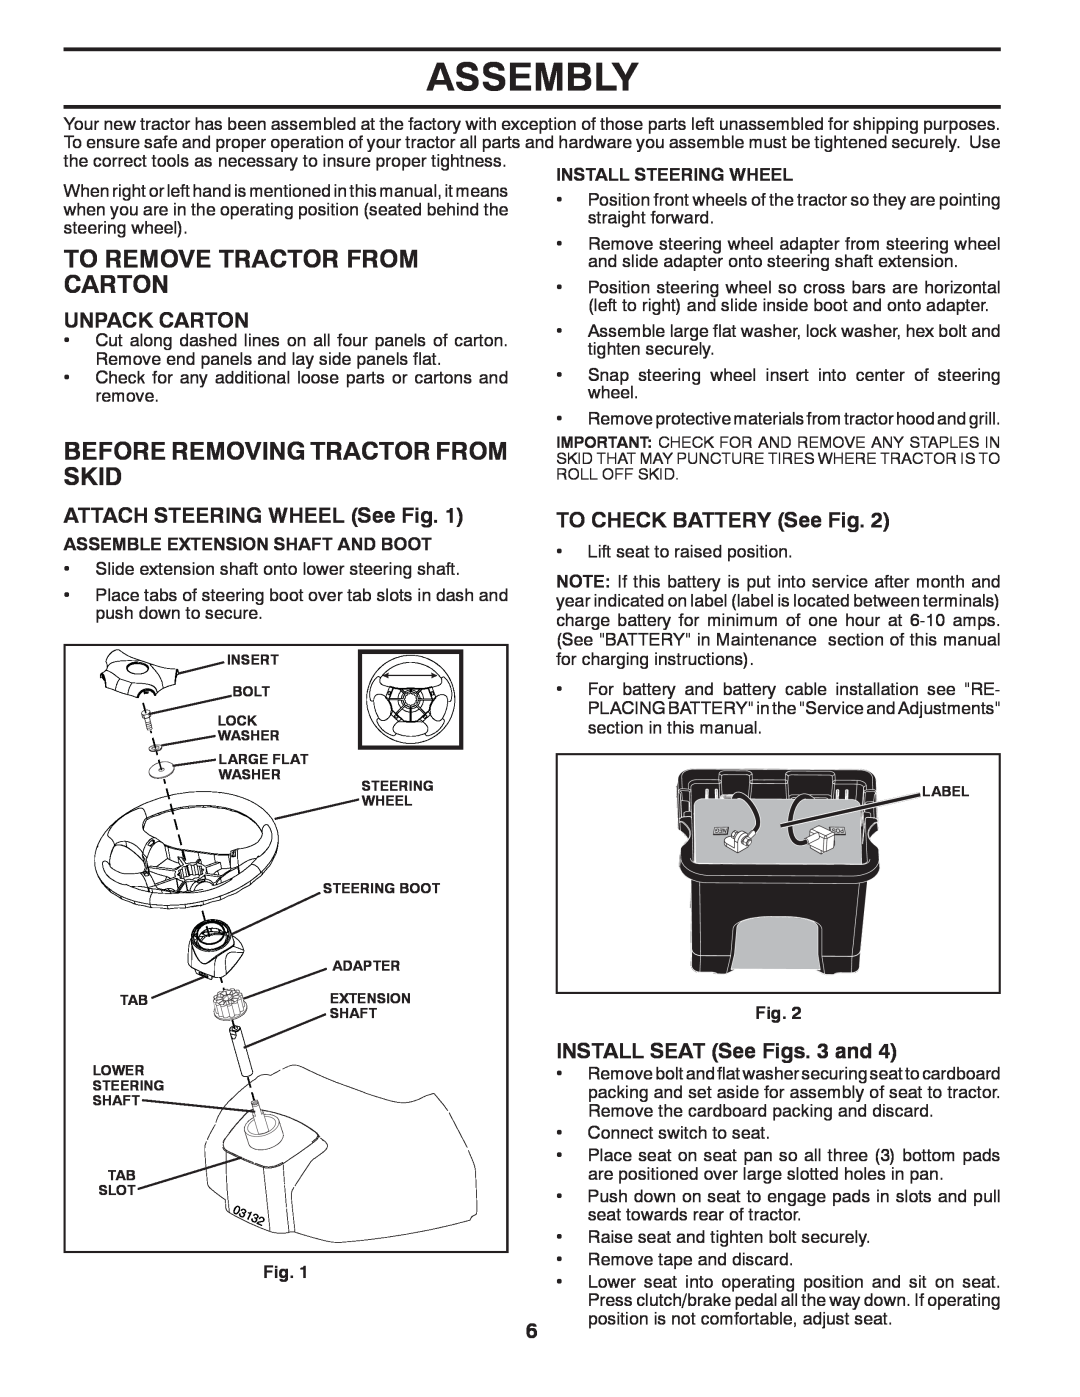 Husqvarna LTH1438 owner manual Assembly, To Remove Tractor From Carton, Before Removing Tractor From Skid, Unpack Carton 